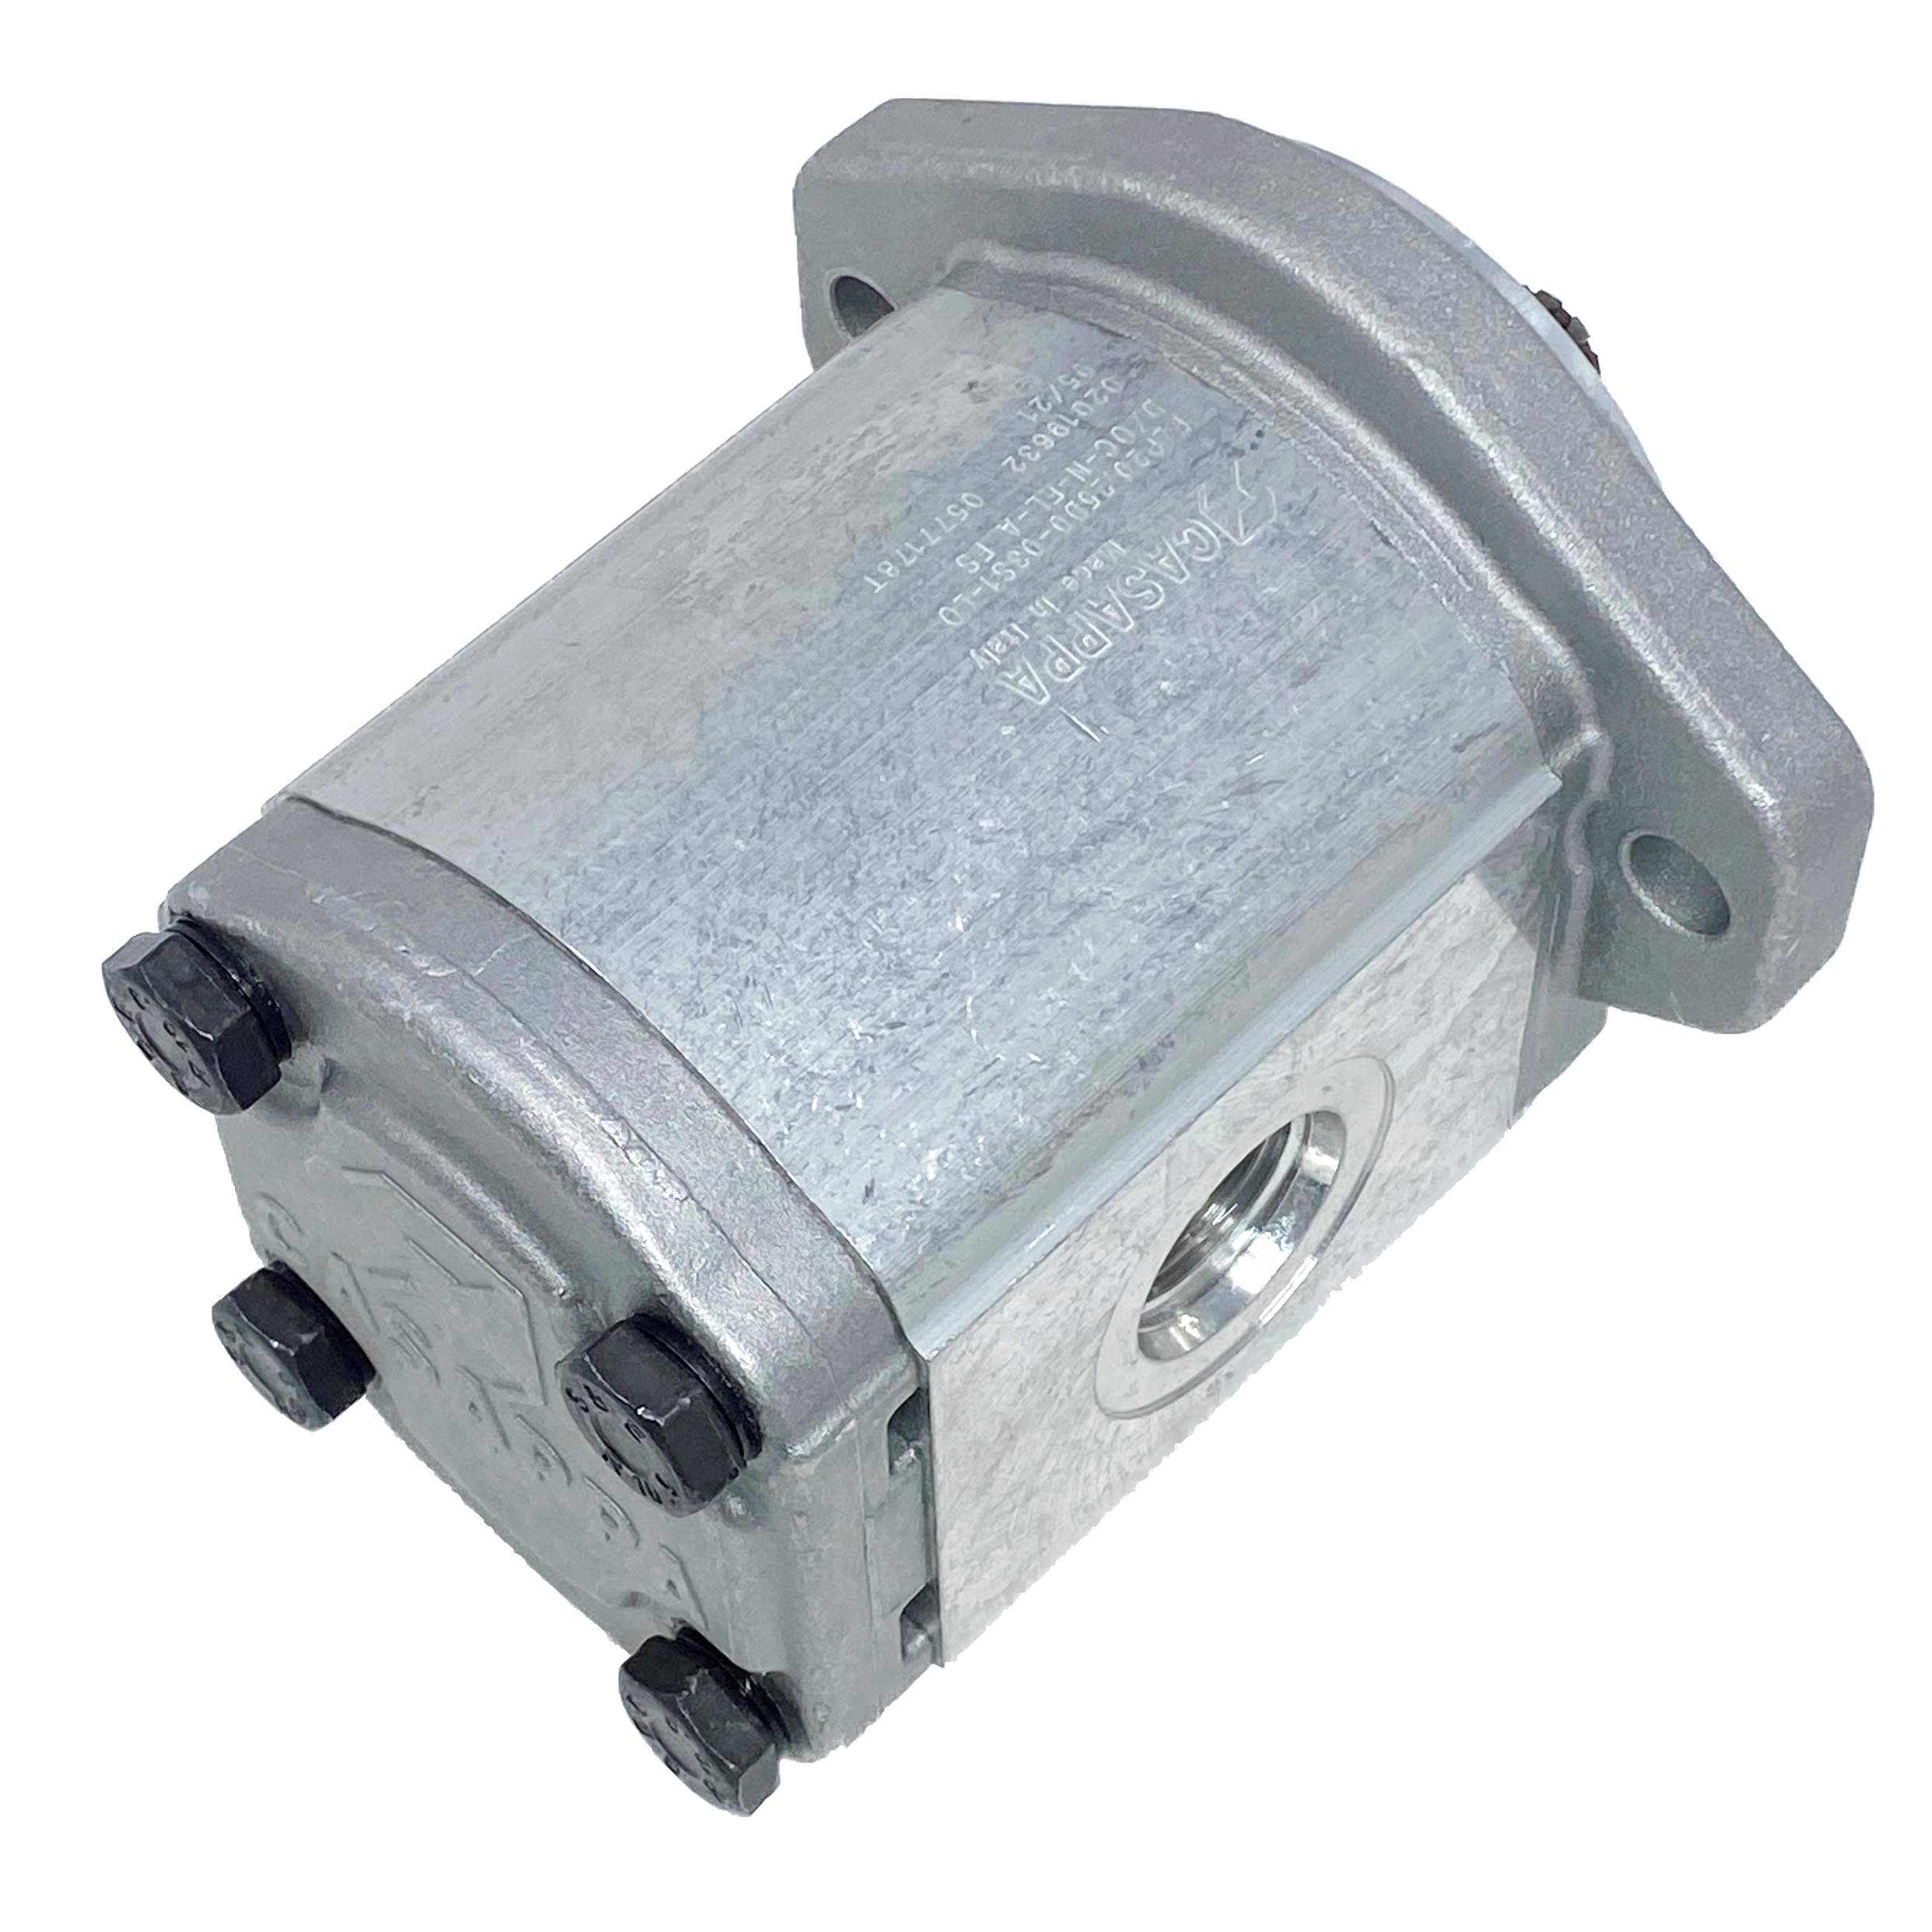 PHM20.31,5B0-07S9-LOC/OG-N-EL : Casappa Polaris Gear Motor, 33.03cc, 2900psi Rated, 2500RPM, Reversible Interior Drain, 11T 16/32dp Shaft, SAE A 2-Bolt Flange, 0.625 (5/8") #10 SAE Inlet, 1.25" #20 SAE Outlet, Cast Iron Body, Aluminum Flange